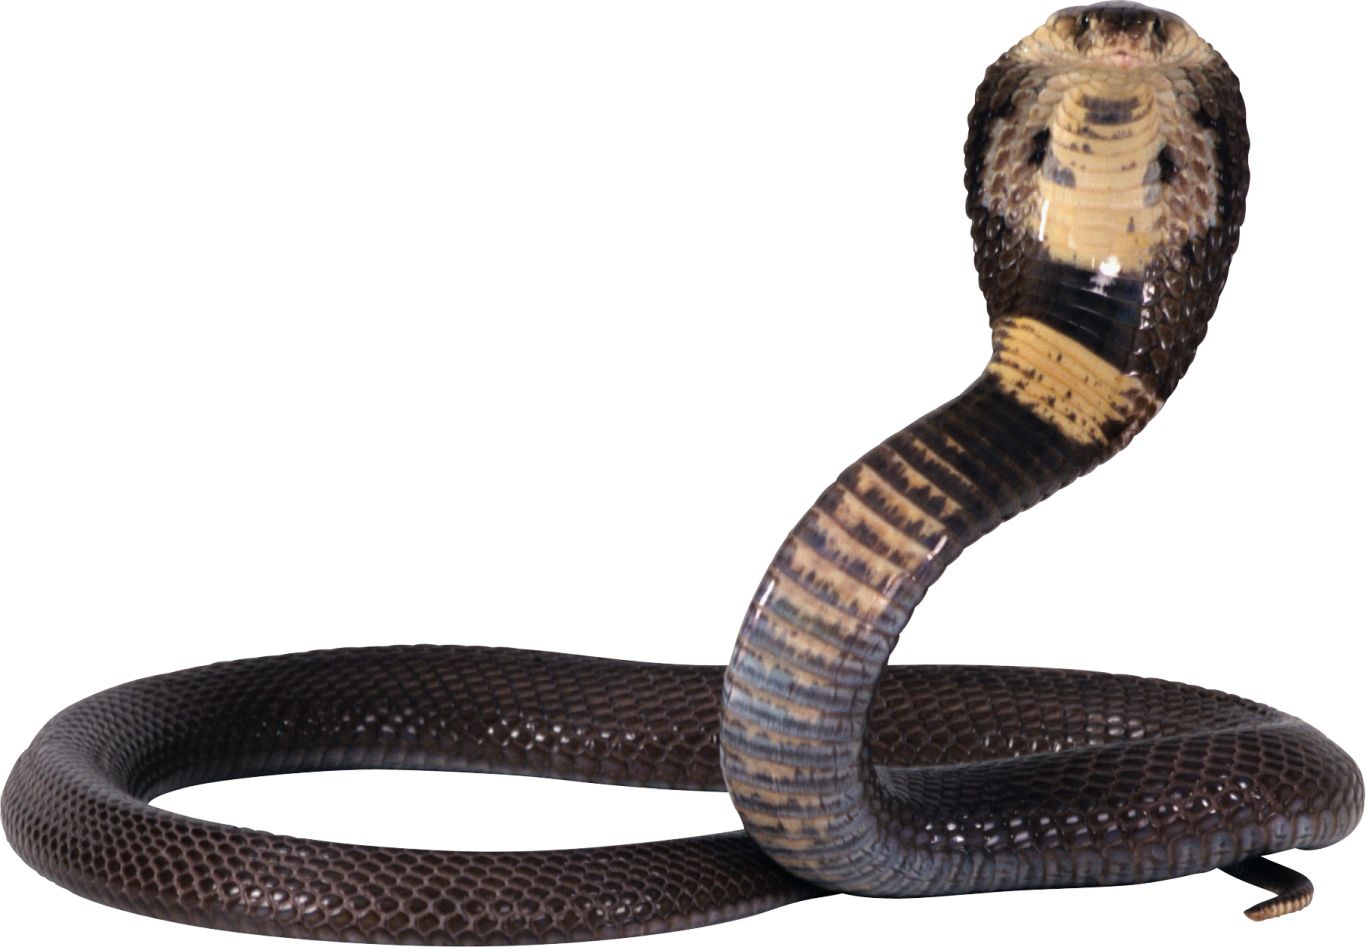 Cobra snake PNG image, free download picture    图片编号:4079